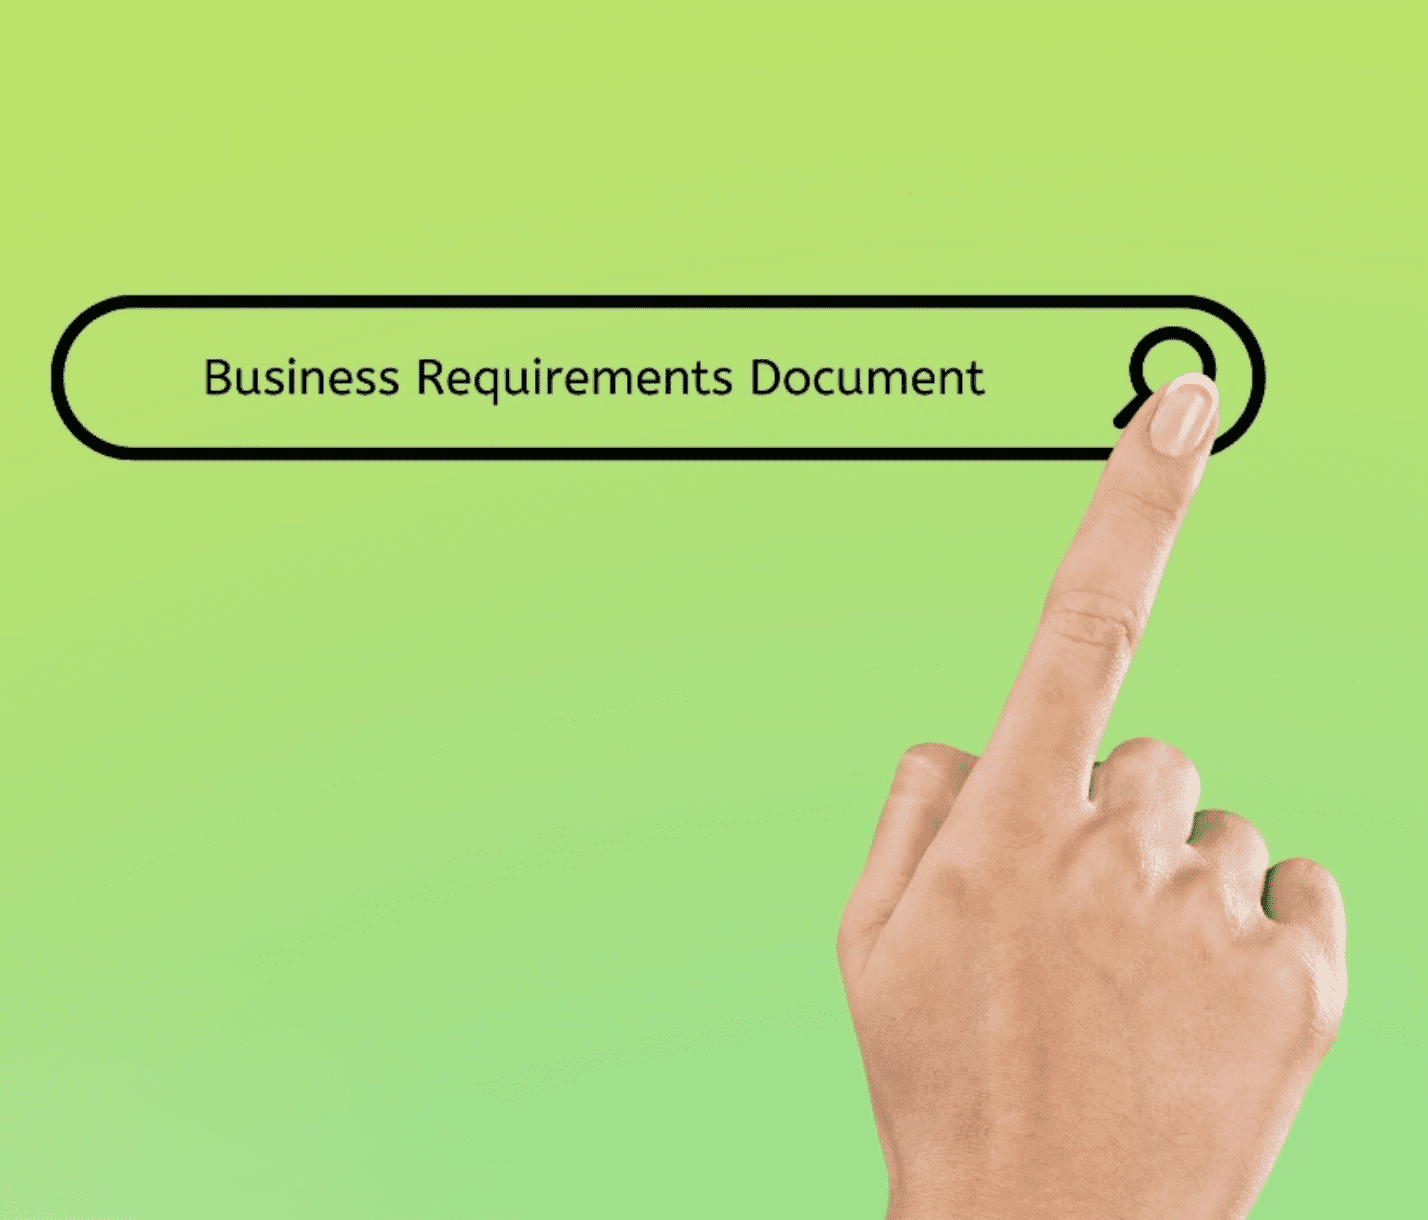 Need A Business Requirements Document?